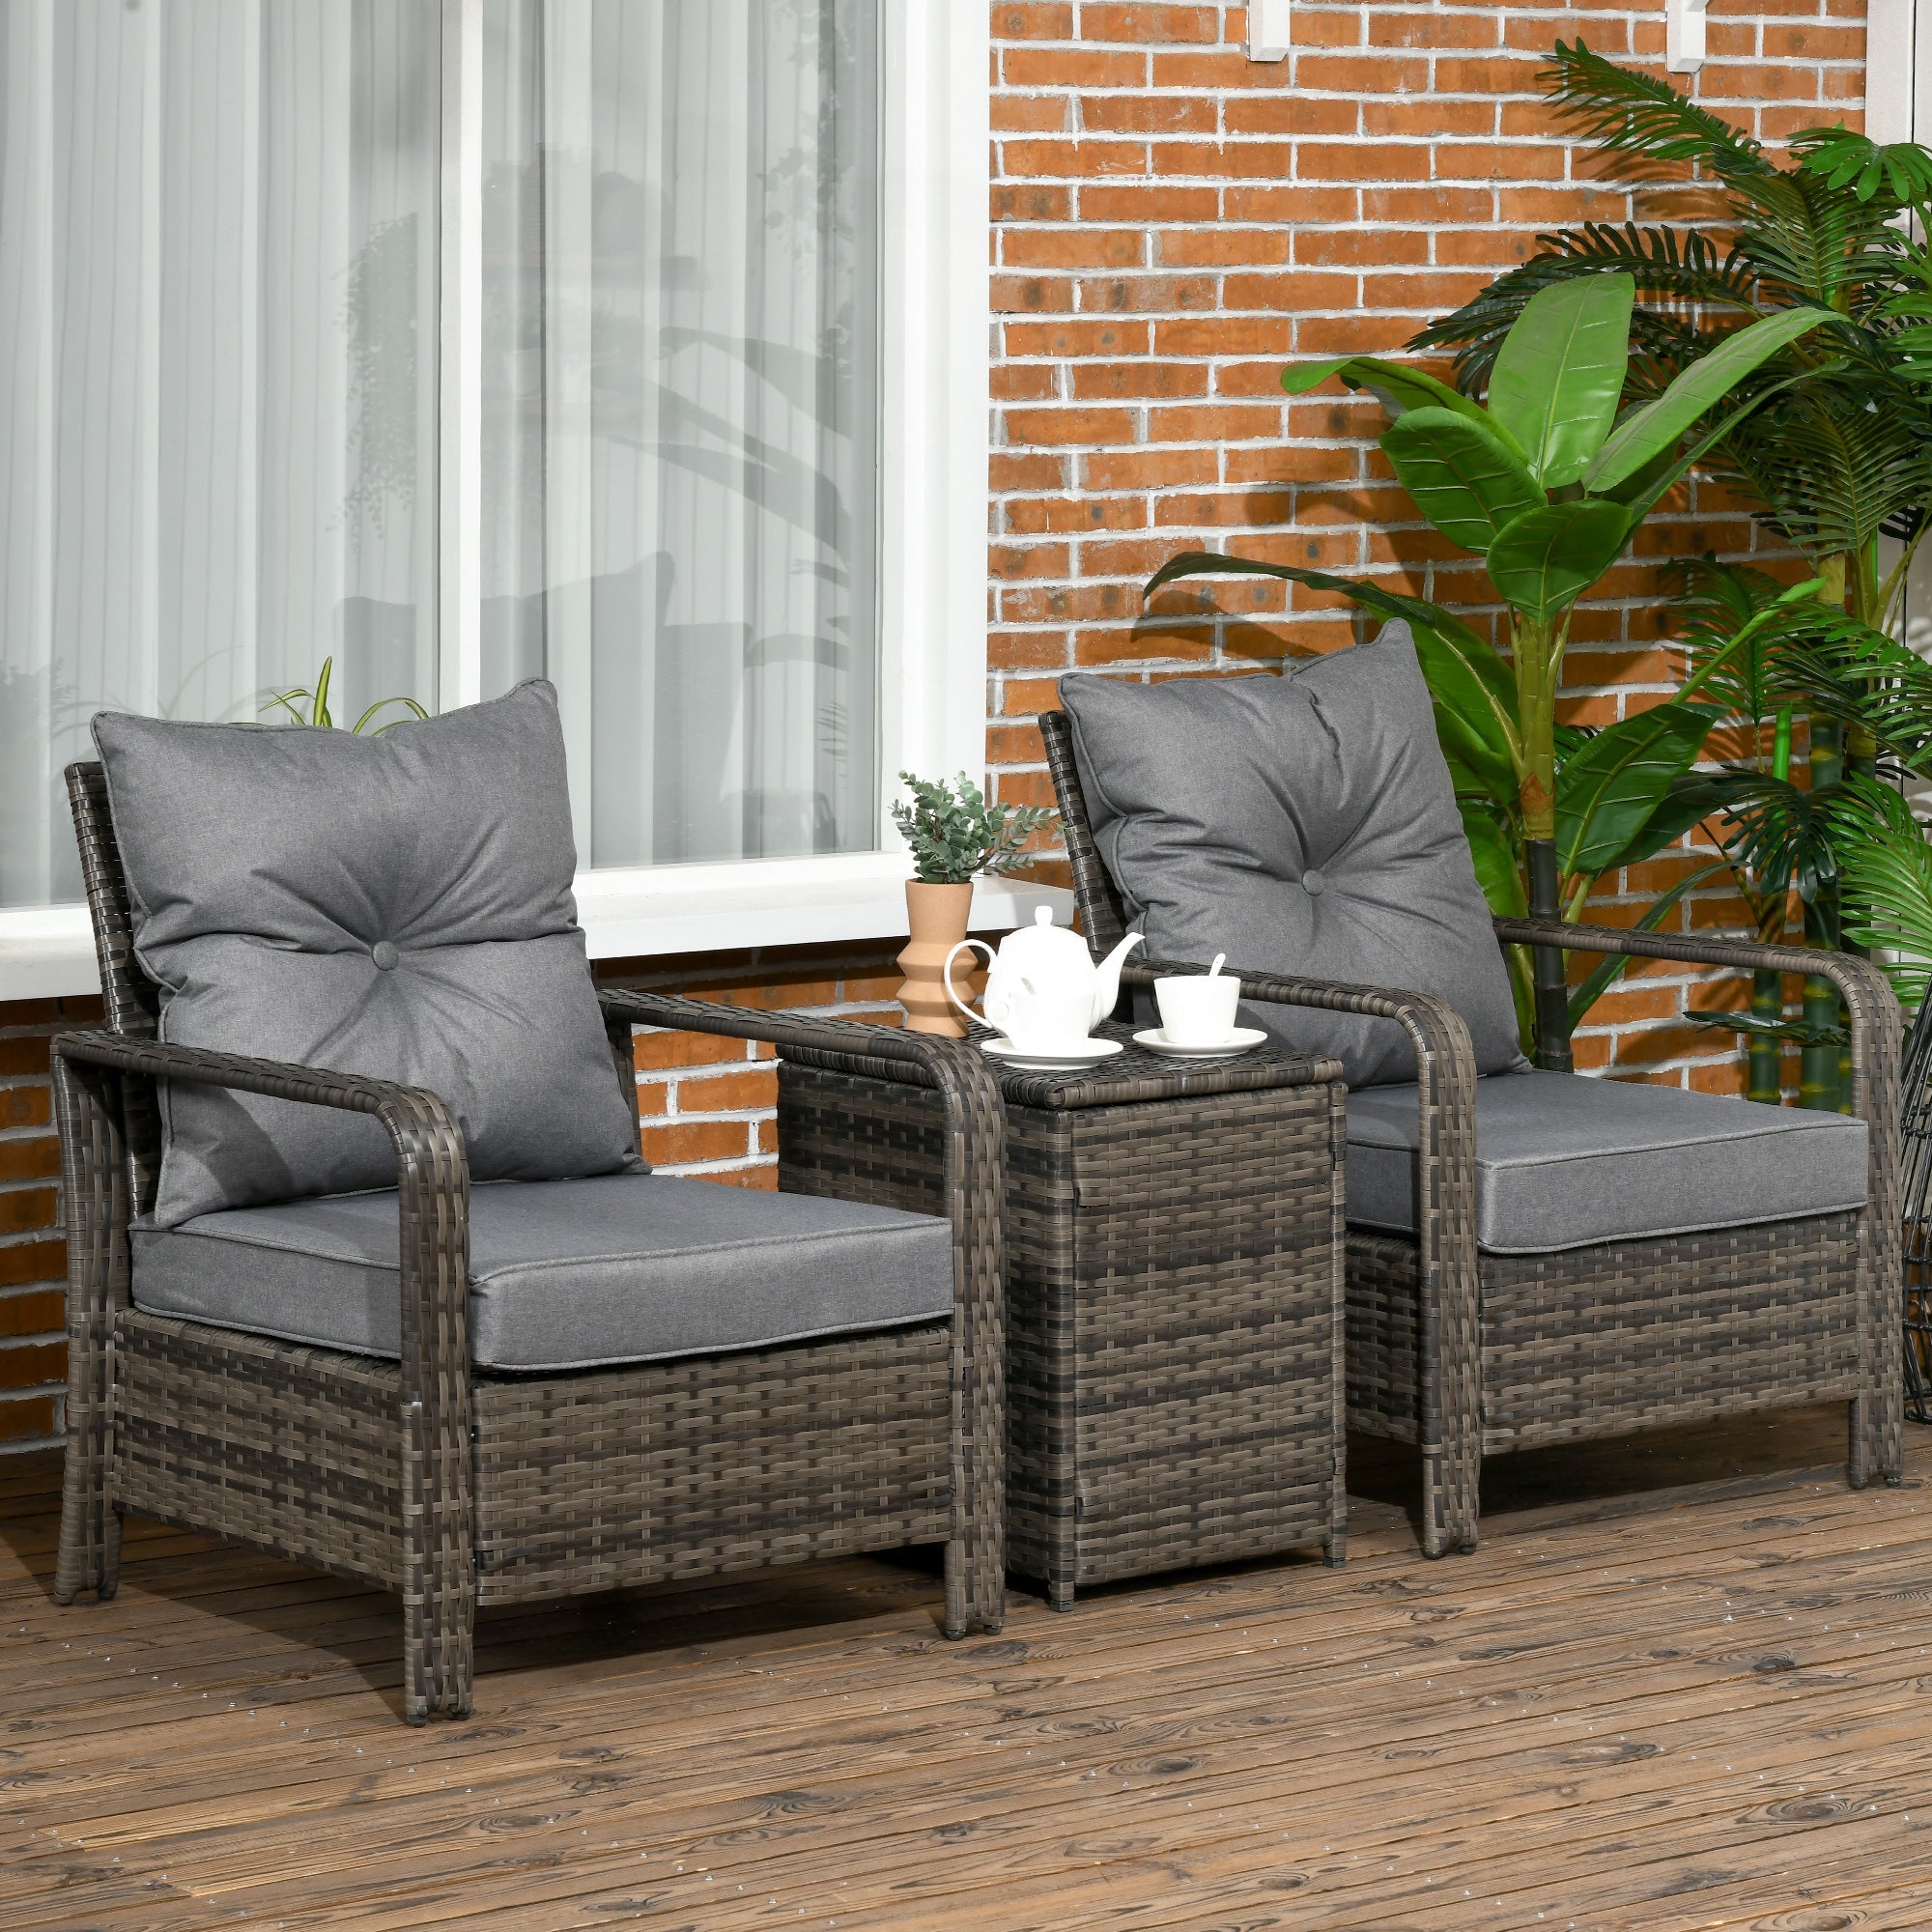 Outsunny 3 pcs PE Rattan Wicker Garden Furniture Patio Bistro Set Weave Conservatory Sofa Storage Table and Chairs Set Grey Cushion & Wicker - TovaHaus